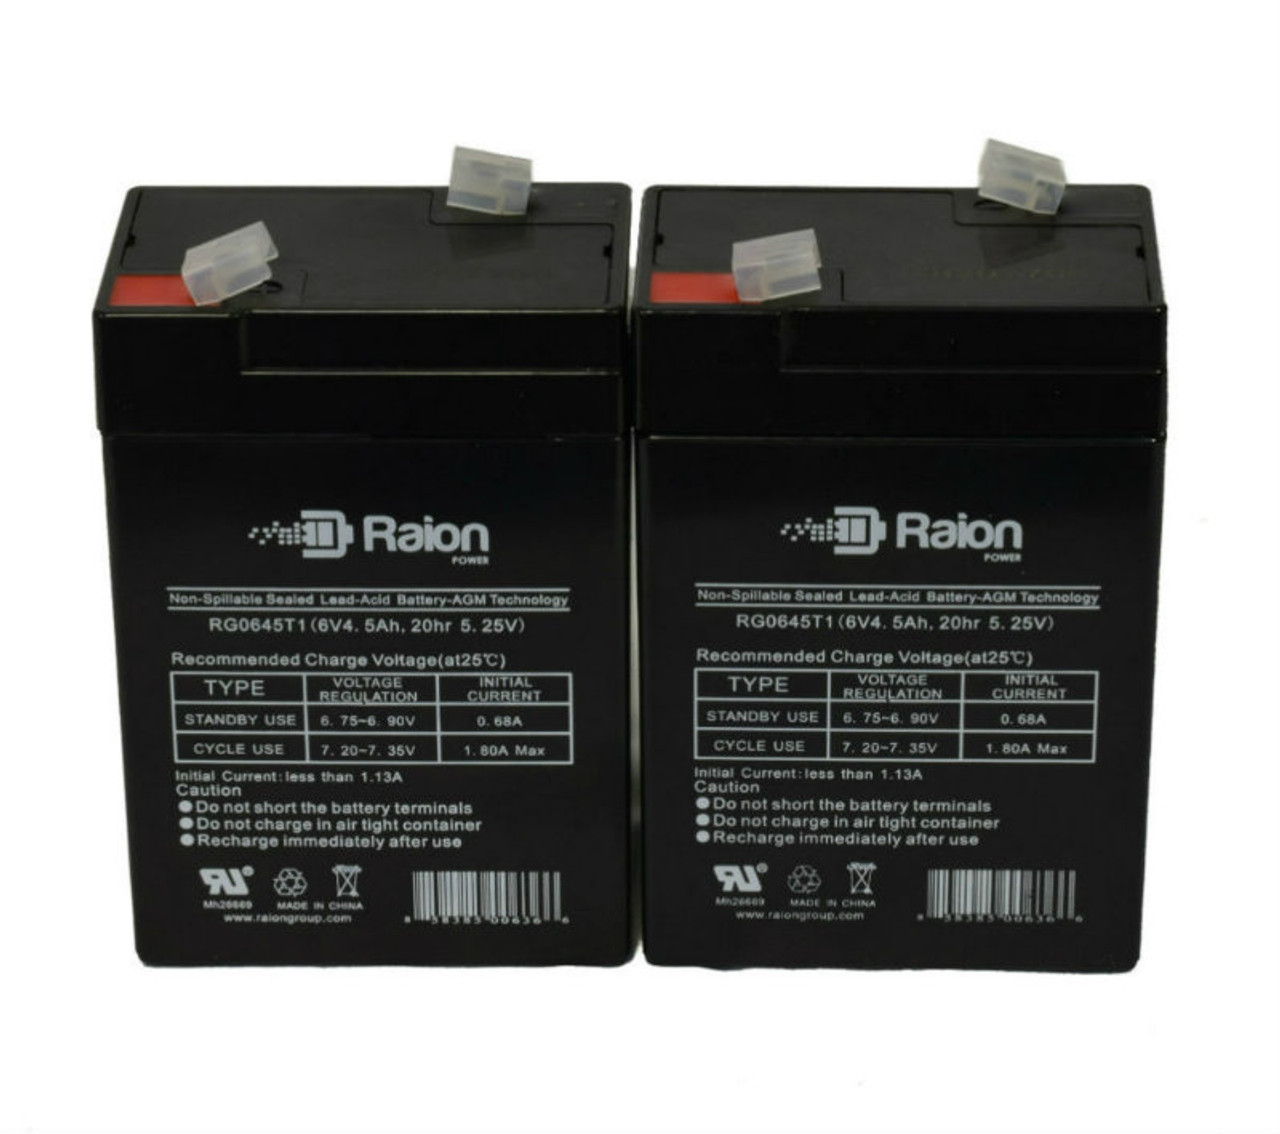 Raion Power 6V 4.5Ah Replacement Emergency Light Battery for Big Beam 2CL6S5 - 2 Pack